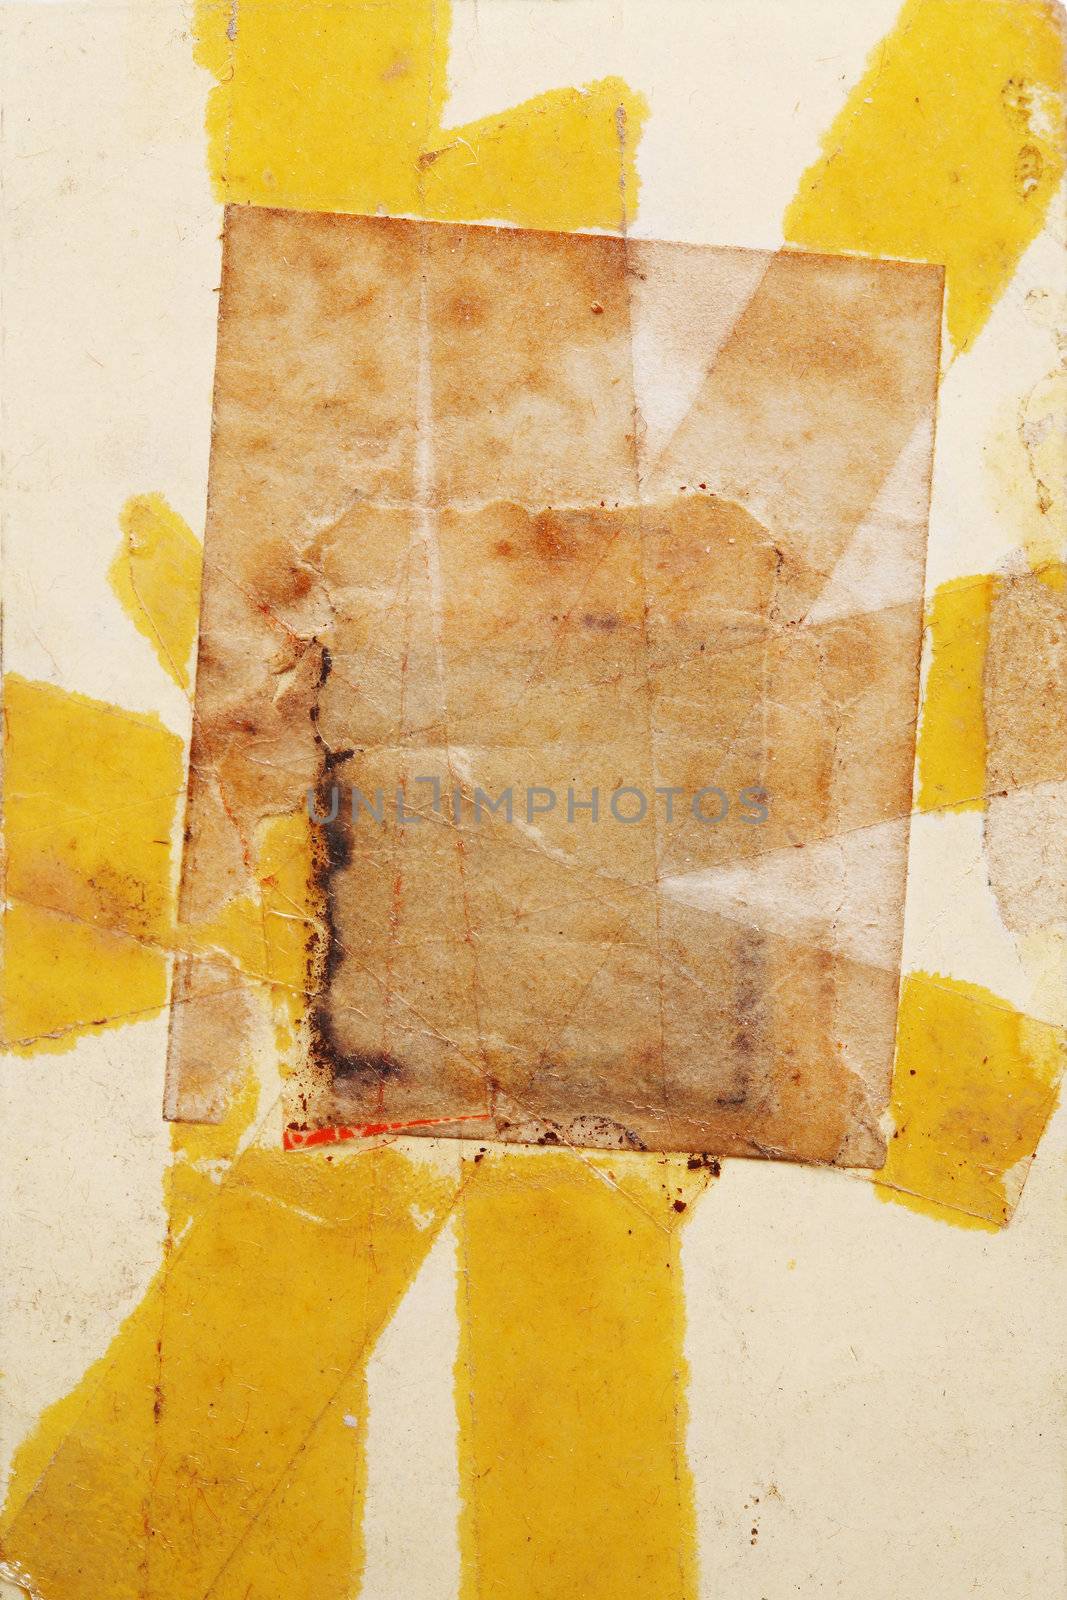 Grunge background with remains of adhesive tape